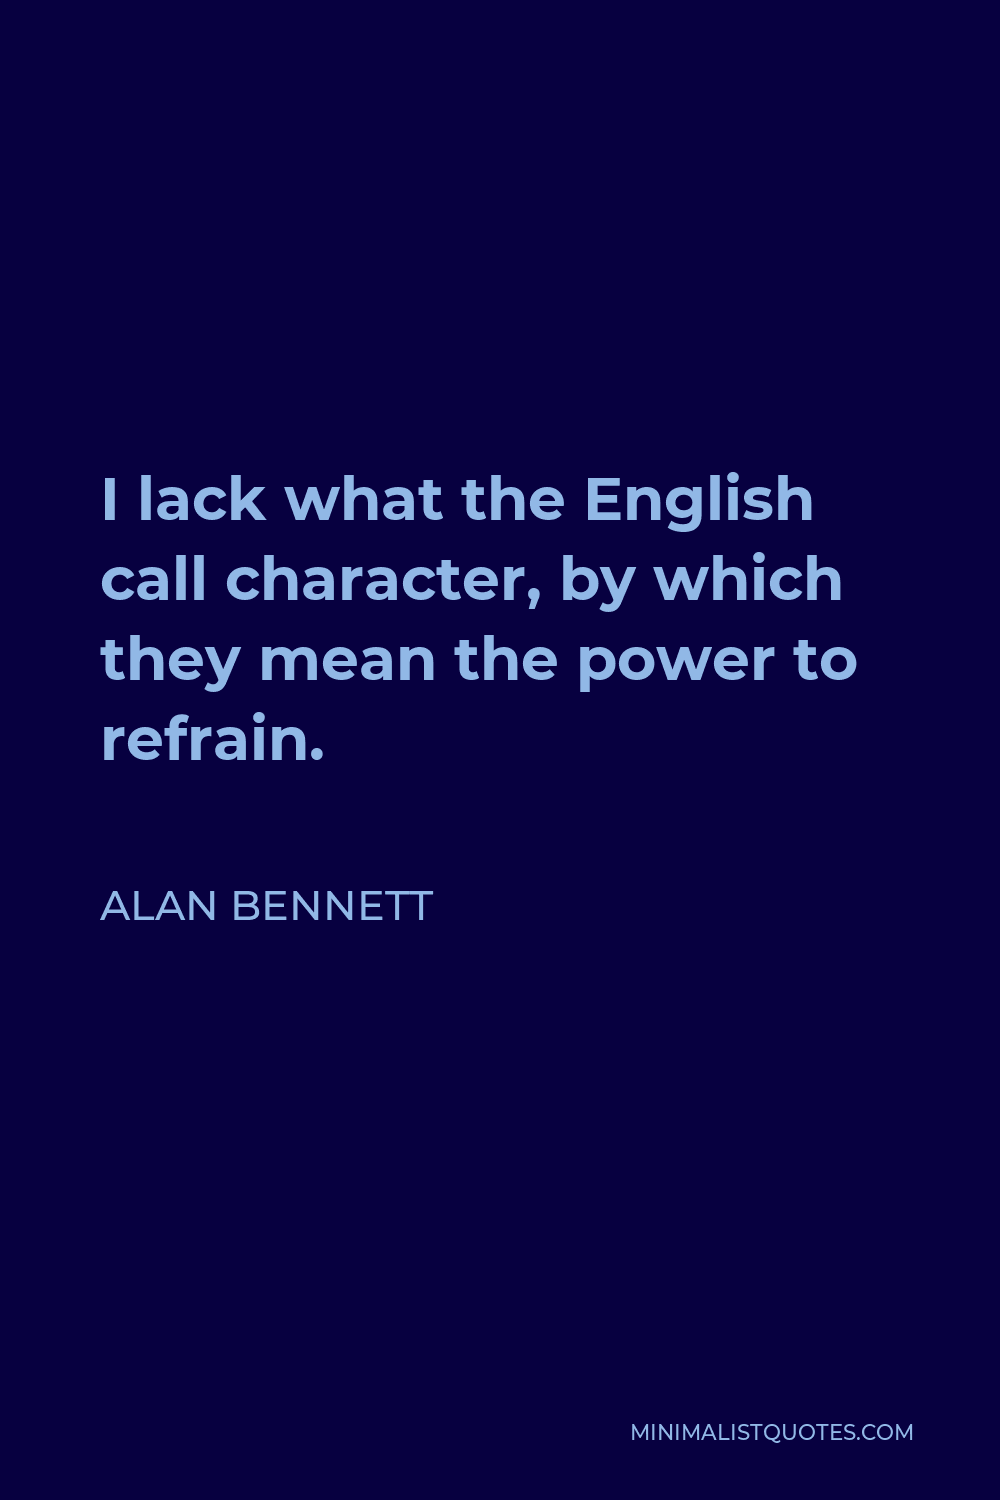 Alan Bennett Quote - I lack what the English call character, by which they mean the power to refrain.